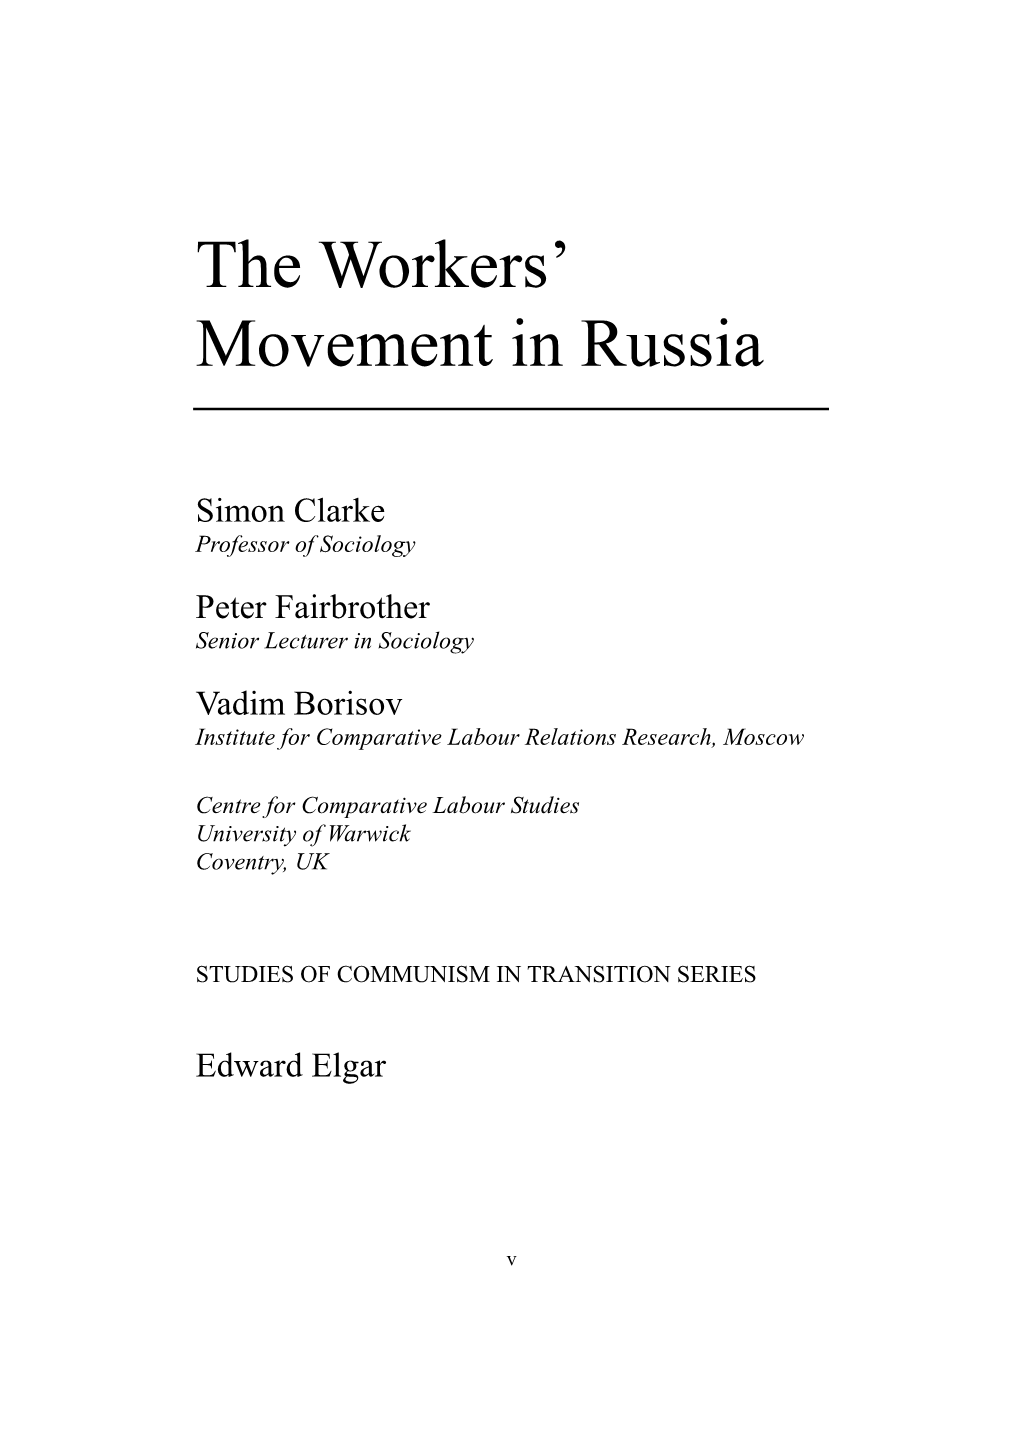 The Workers' Movement in Russia